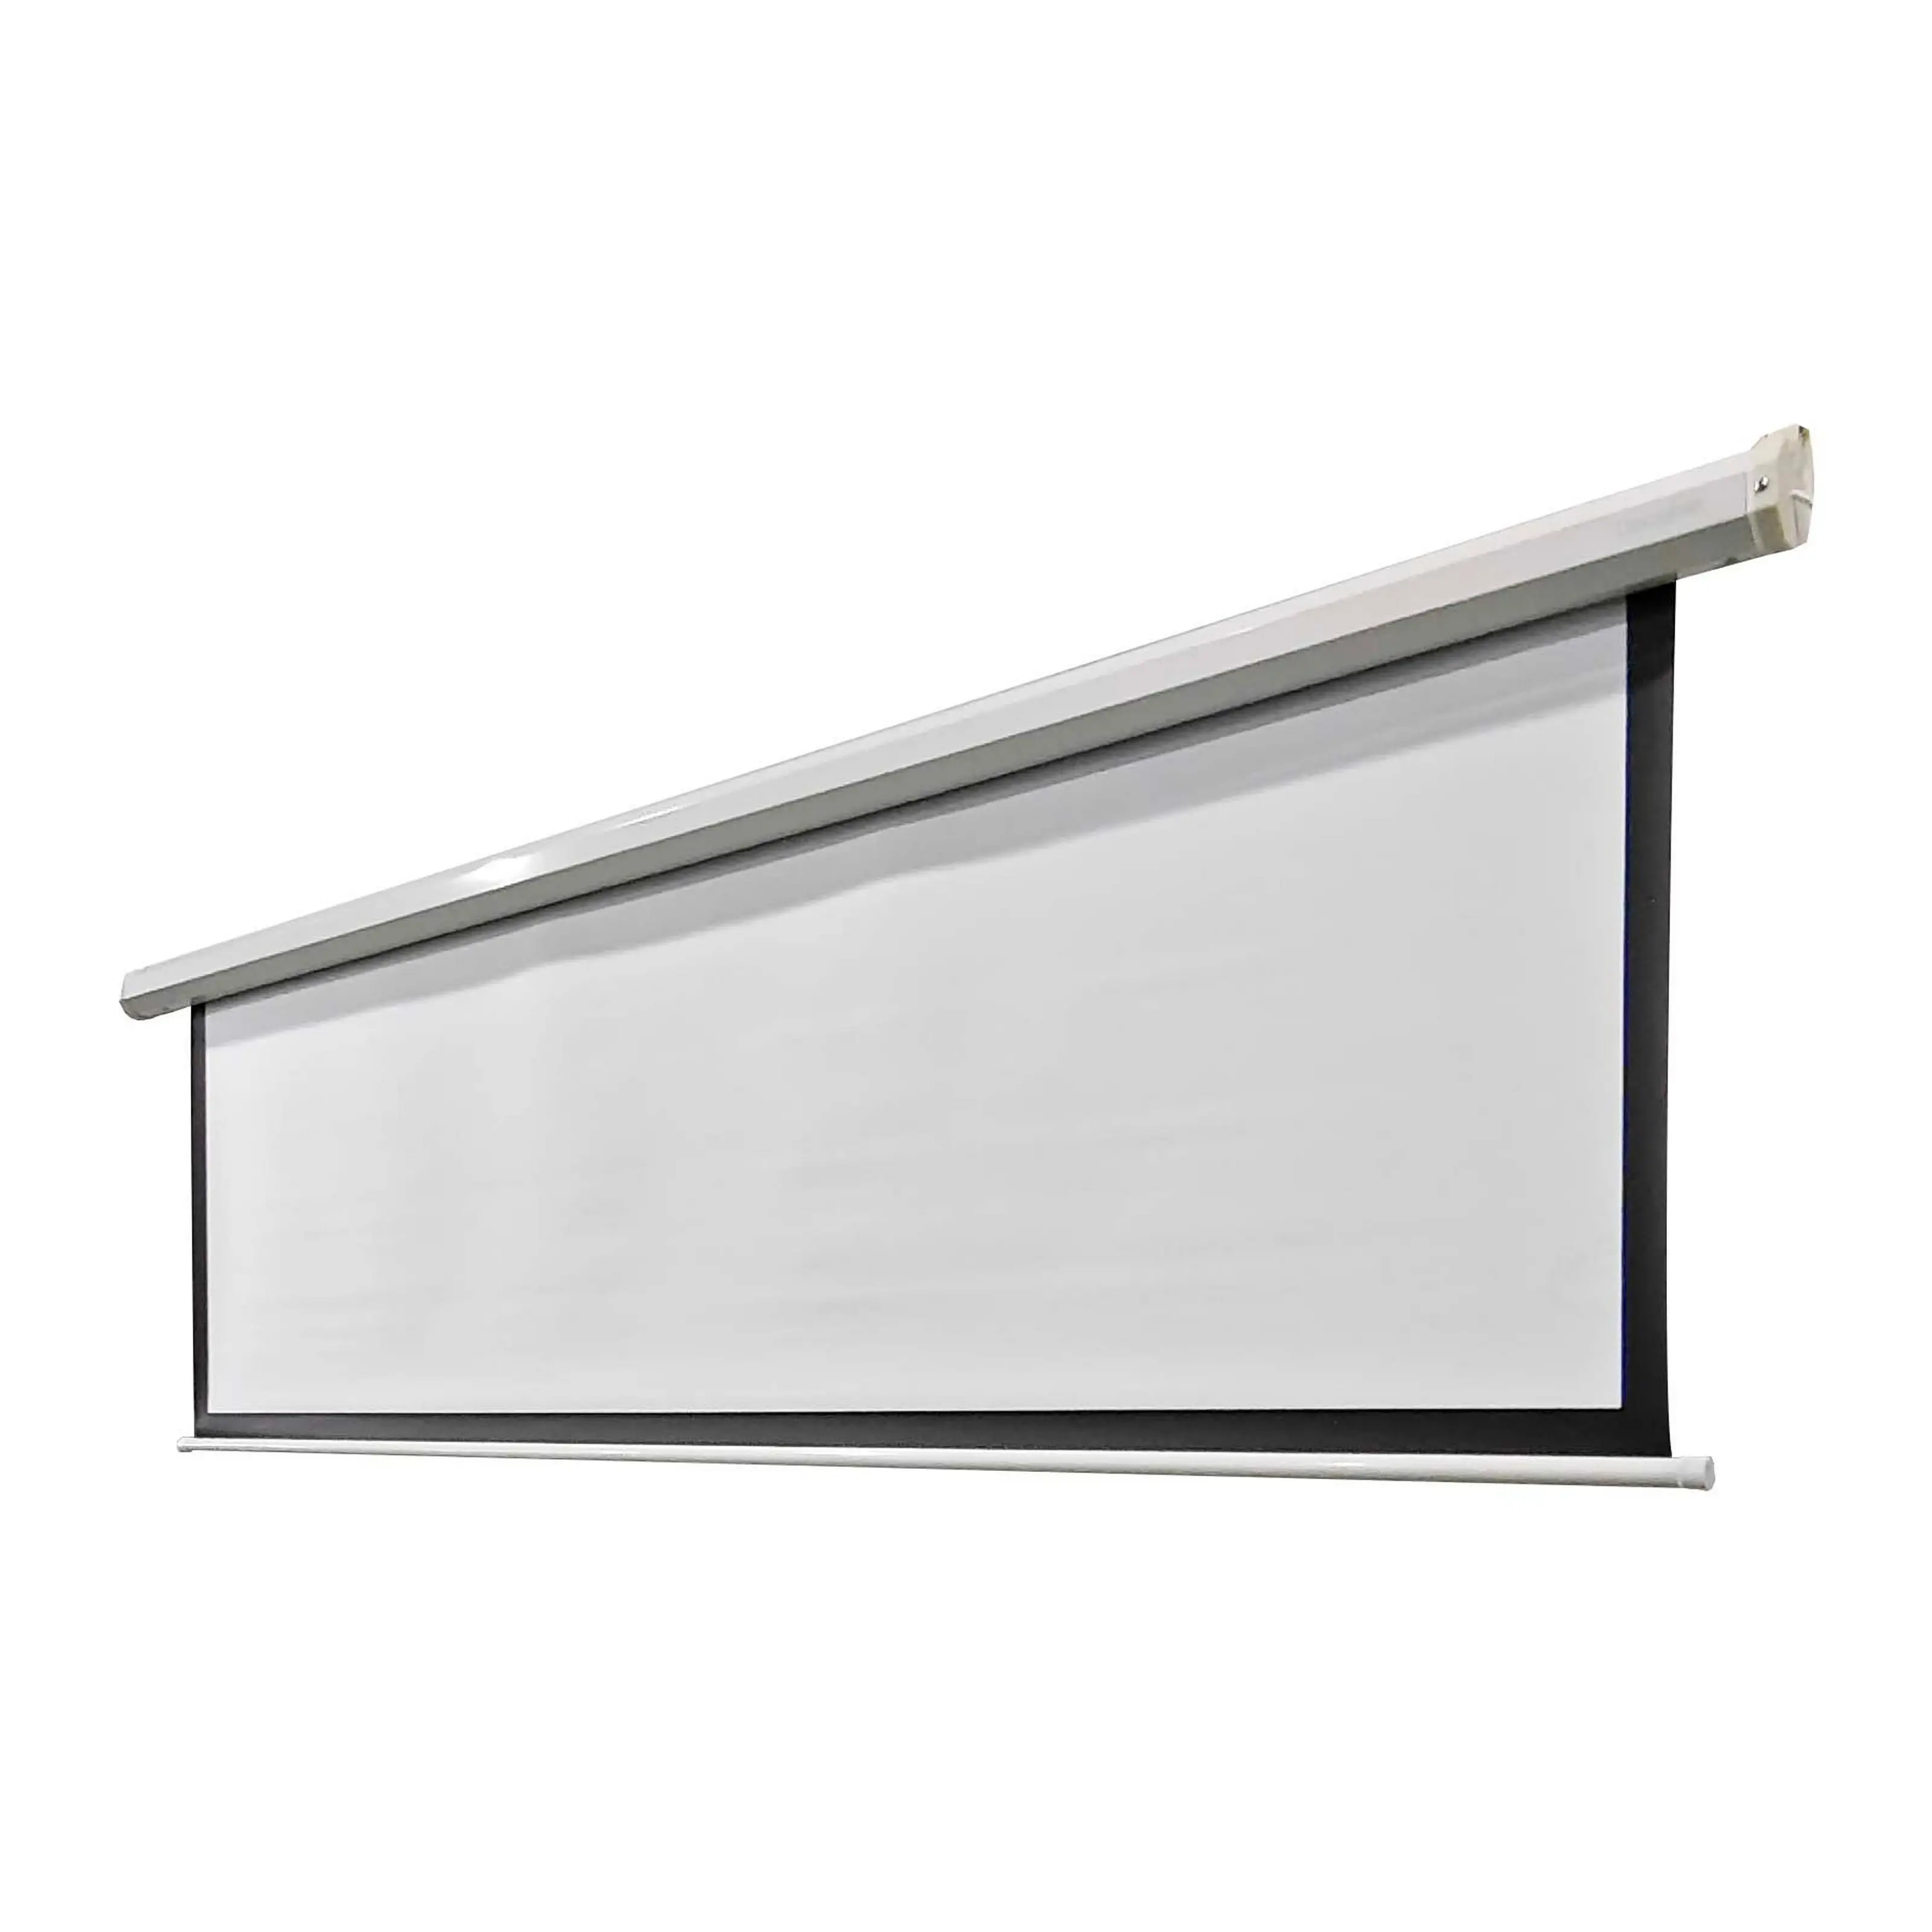 electronic RC 3D cheaper price with high quality pull up/pull down Projection Screen manual movie screen for home cinema